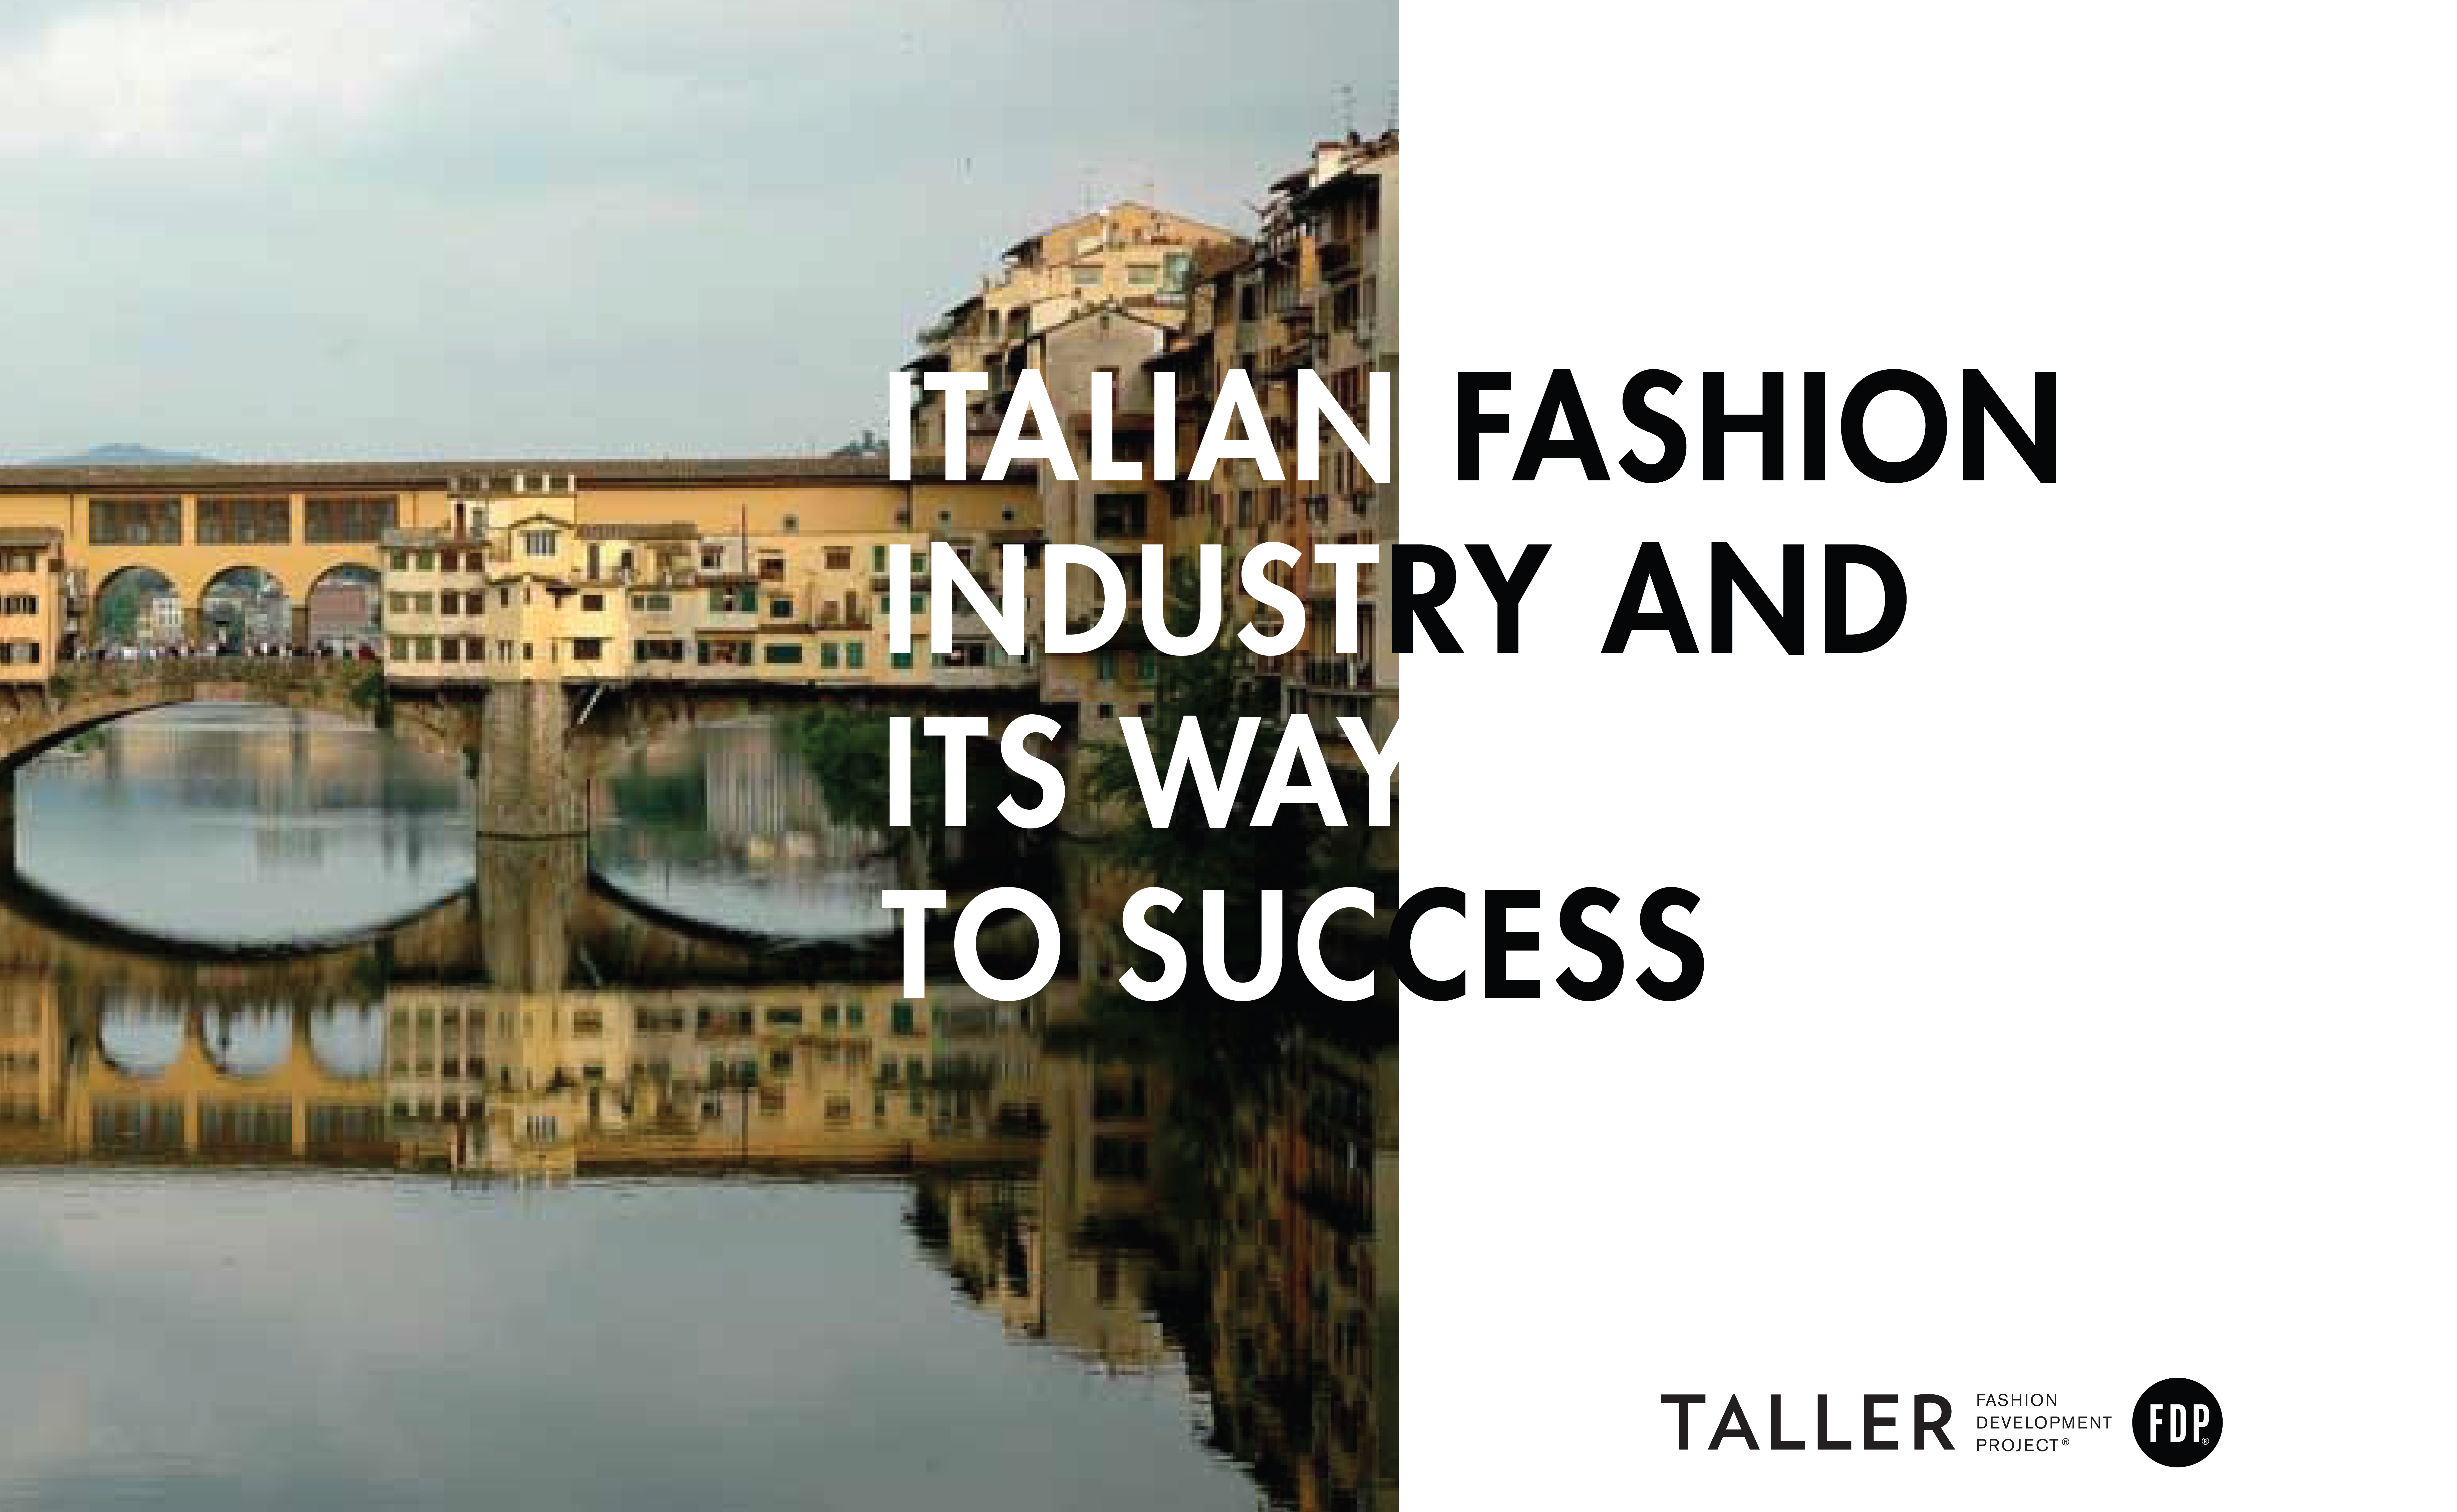 Fashion Industry Model: Italian Fashion Industry and its way to success